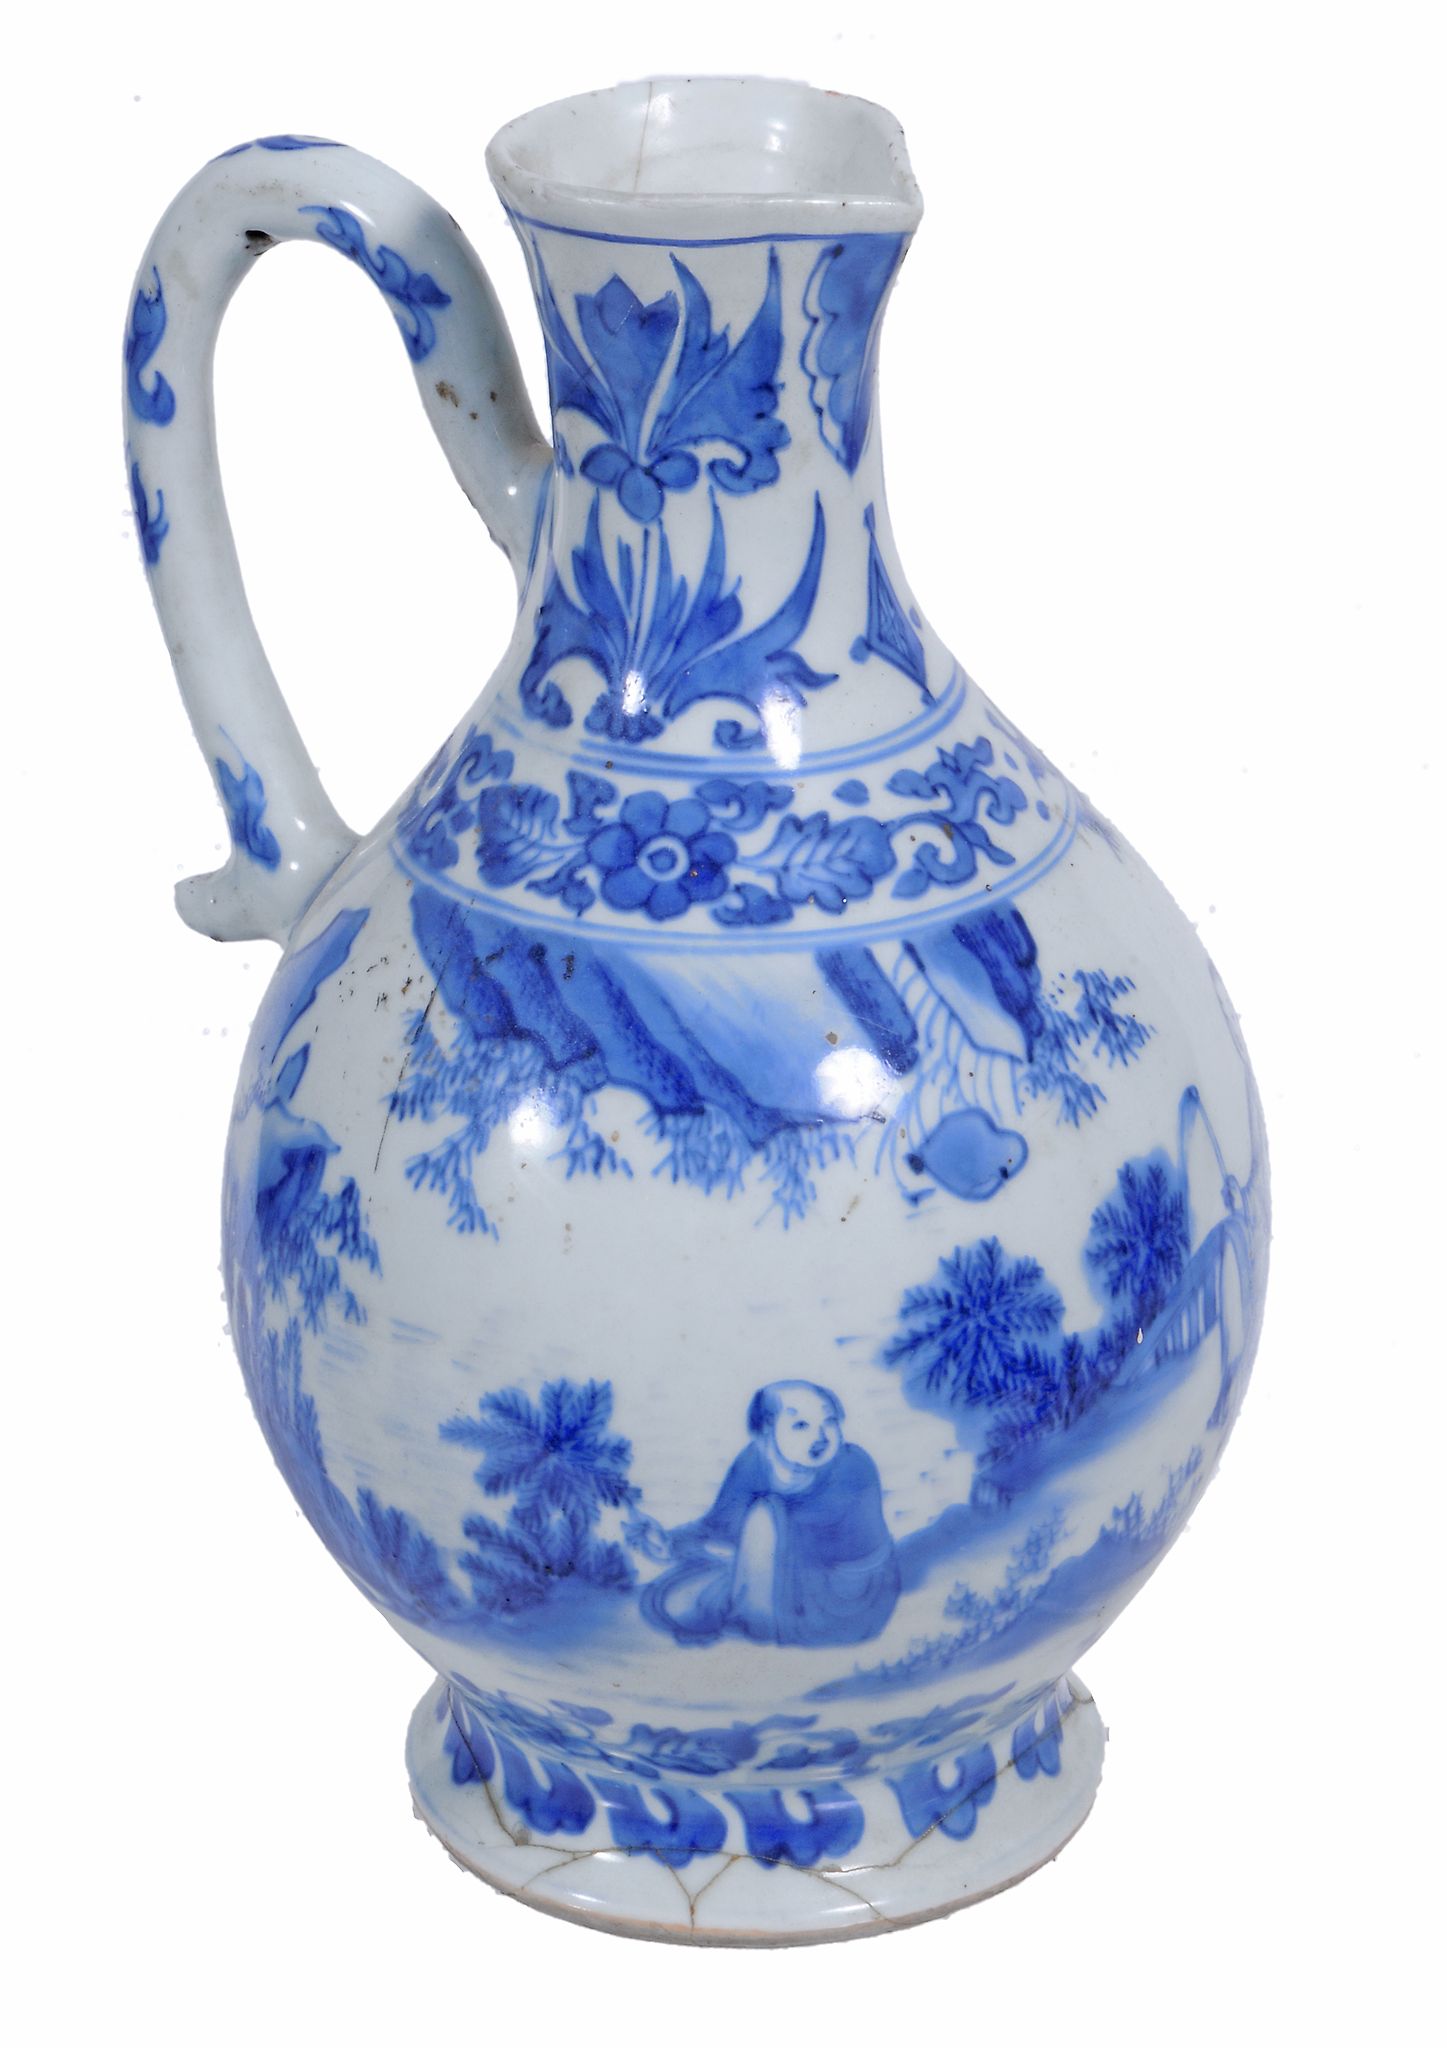 A Chinese ewer  , Transitional, 17th century,  with ovoid body painted in underglaze blue, a sage